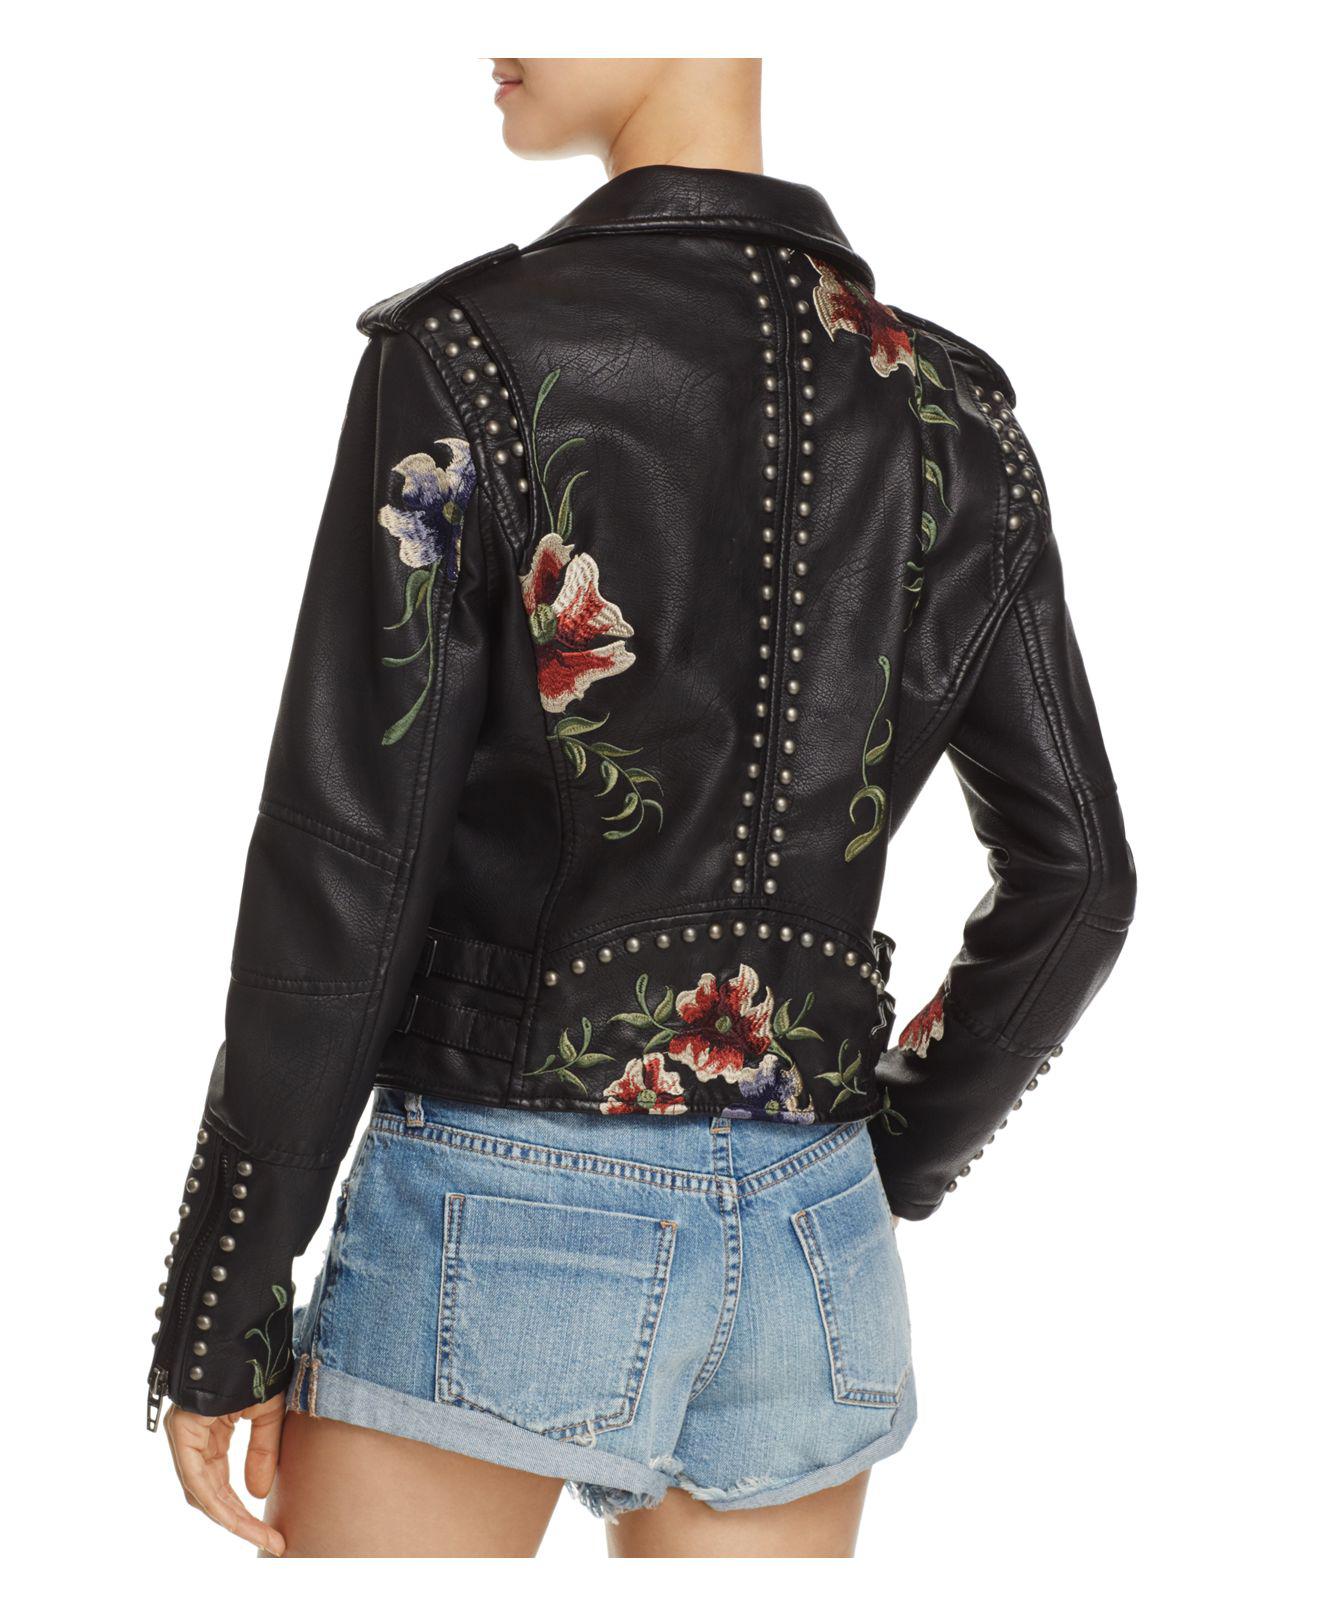 Lyst - Blank NYC Floral Embroidered Studded Faux Leather Moto Jacket in